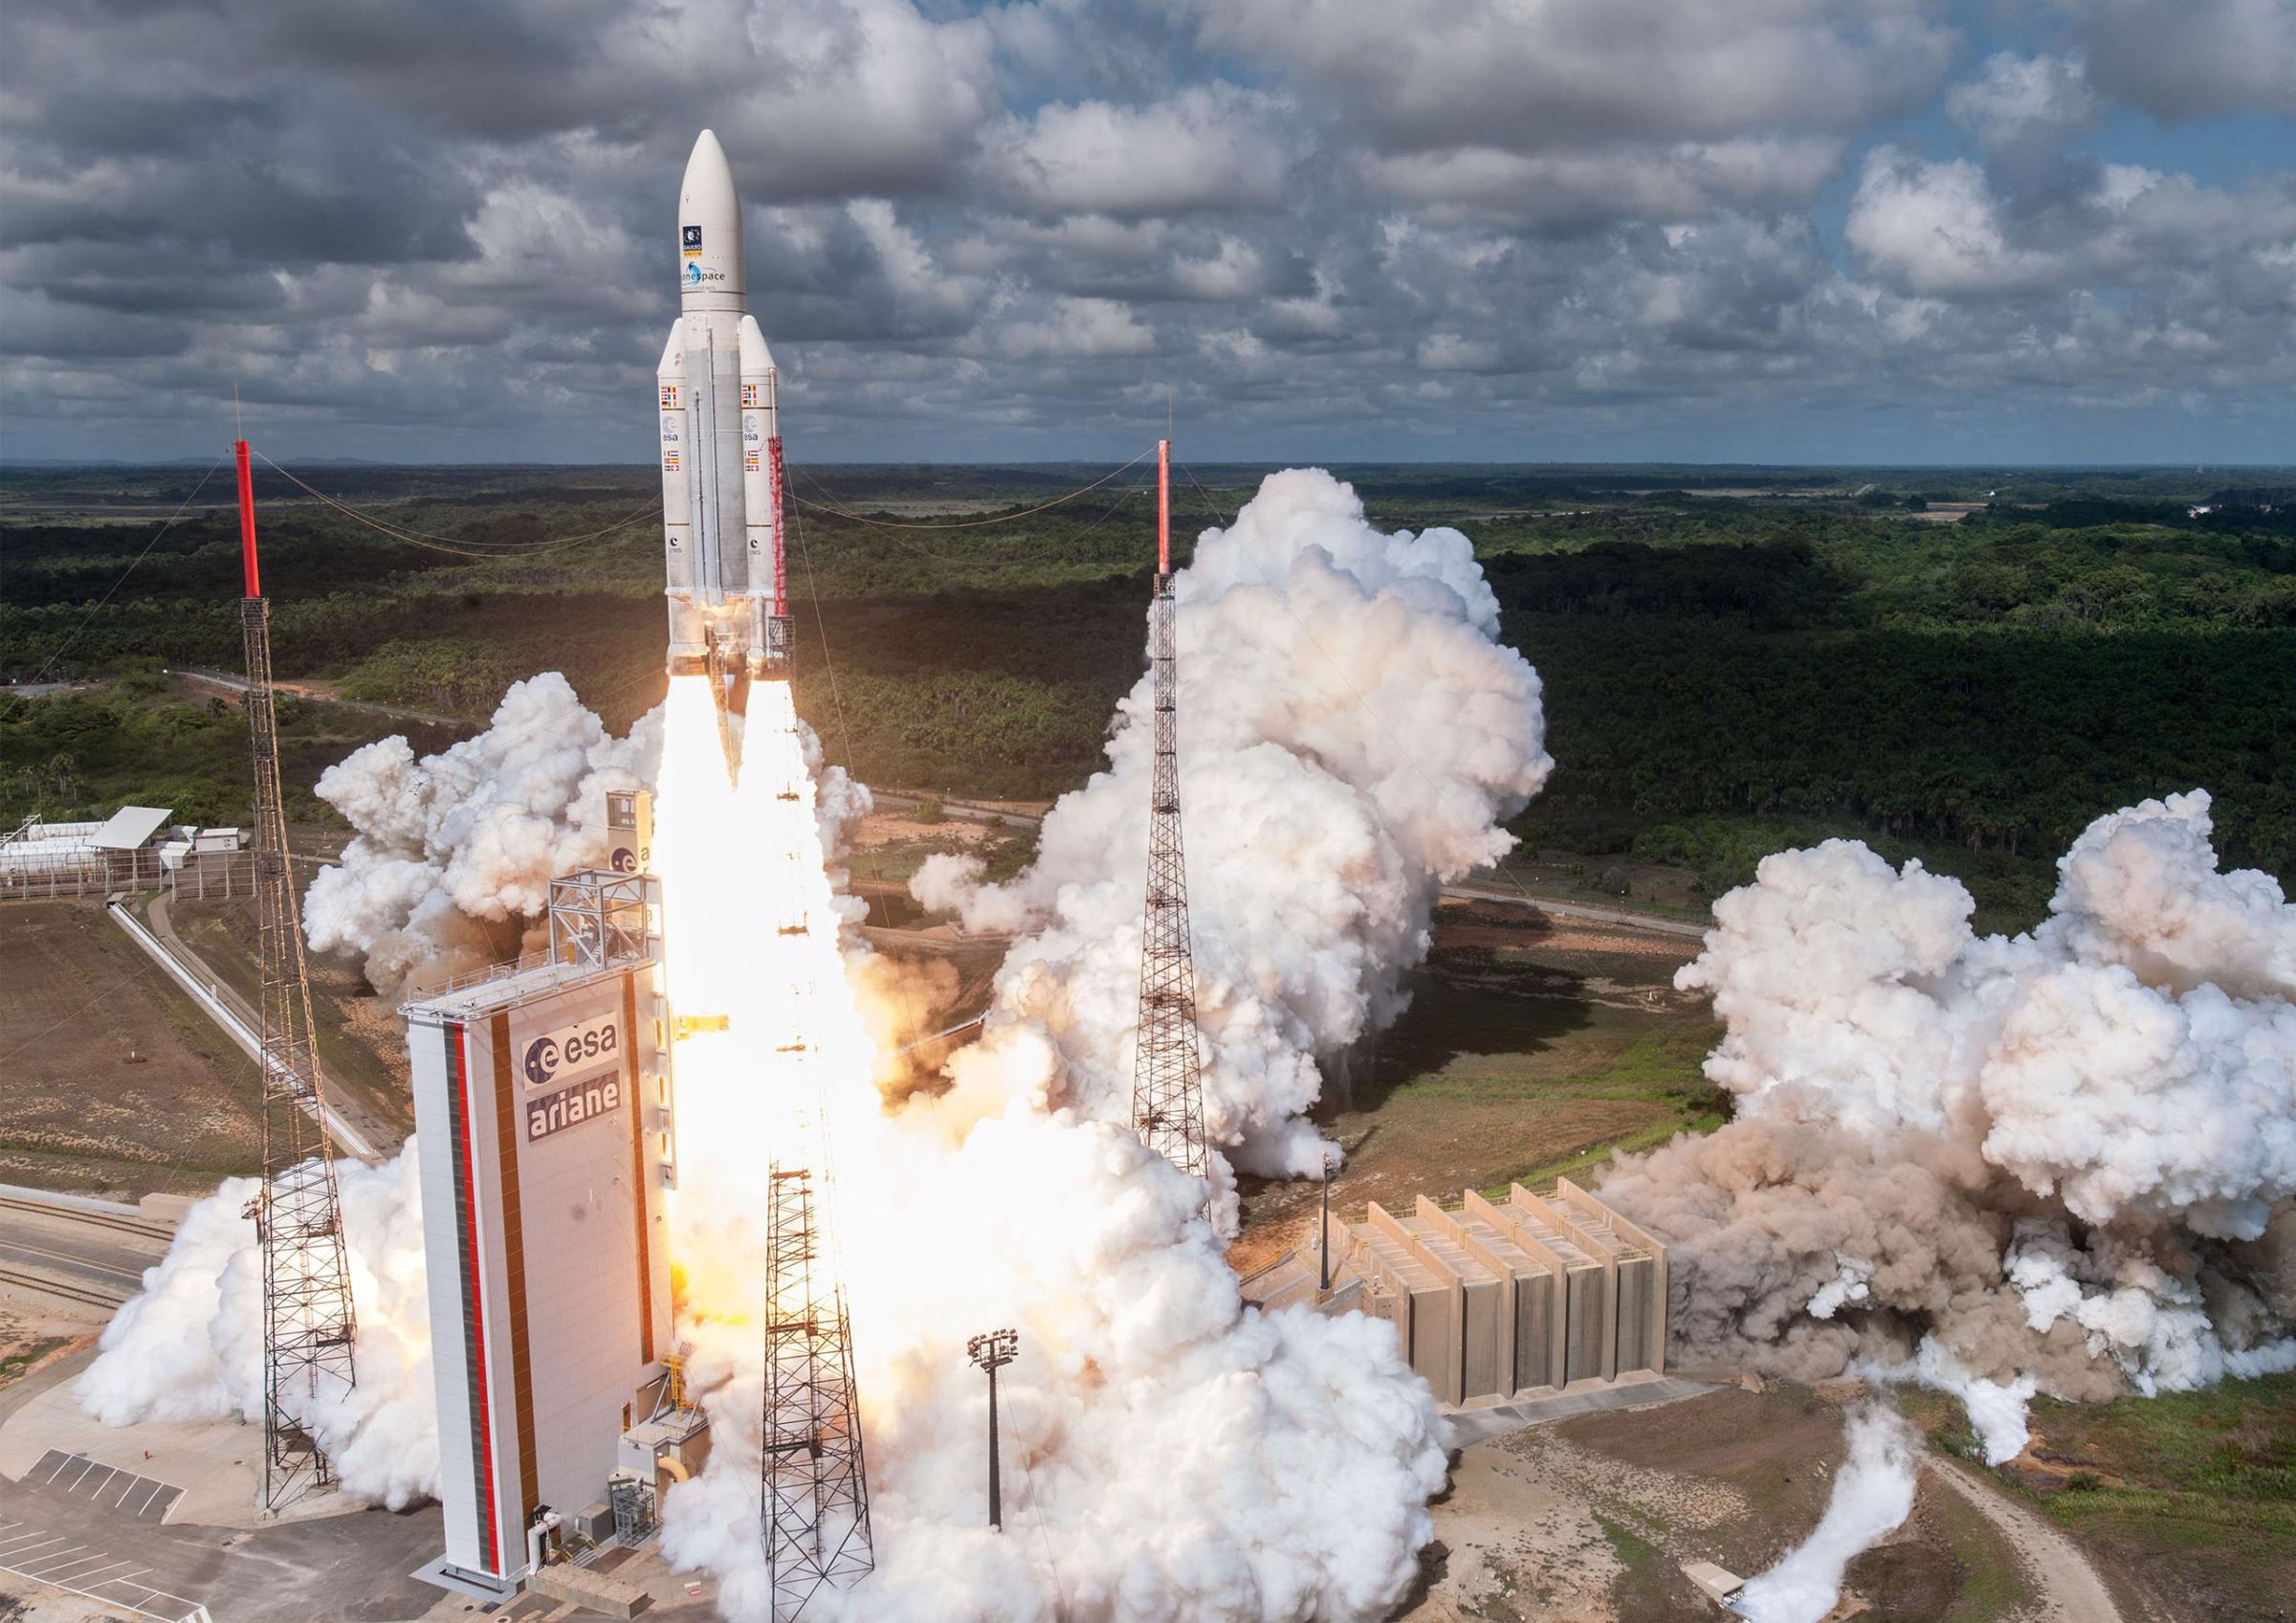 This photo released on Nov. 17, 2016 shows shows the Ariane 5 rocket with a payload of four Galileo satellites lifting off from ESA's European Spaceport in Kourou, French Guiana.